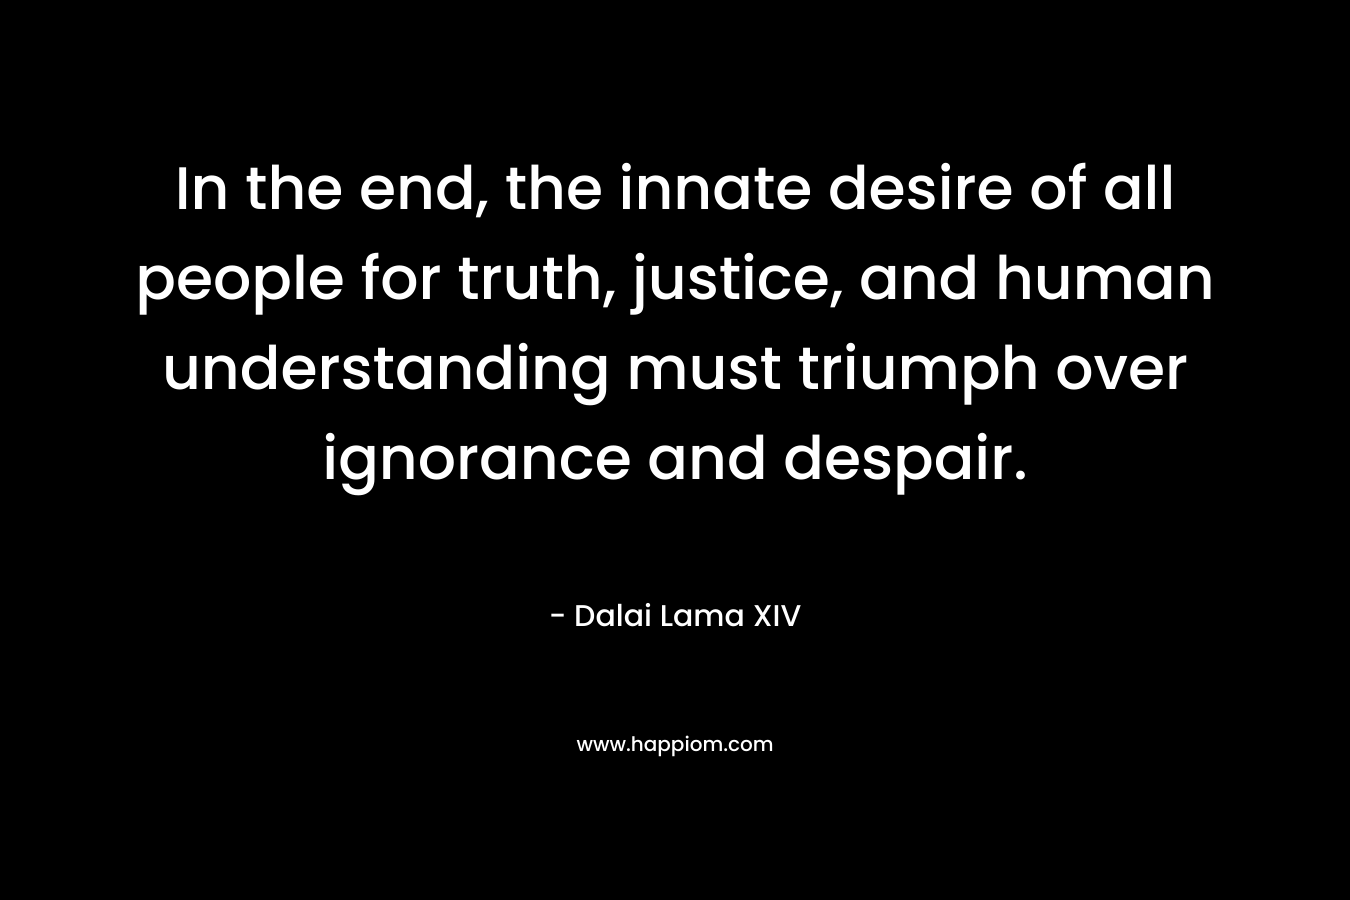 In the end, the innate desire of all people for truth, justice, and human understanding must triumph over ignorance and despair. – Dalai Lama XIV